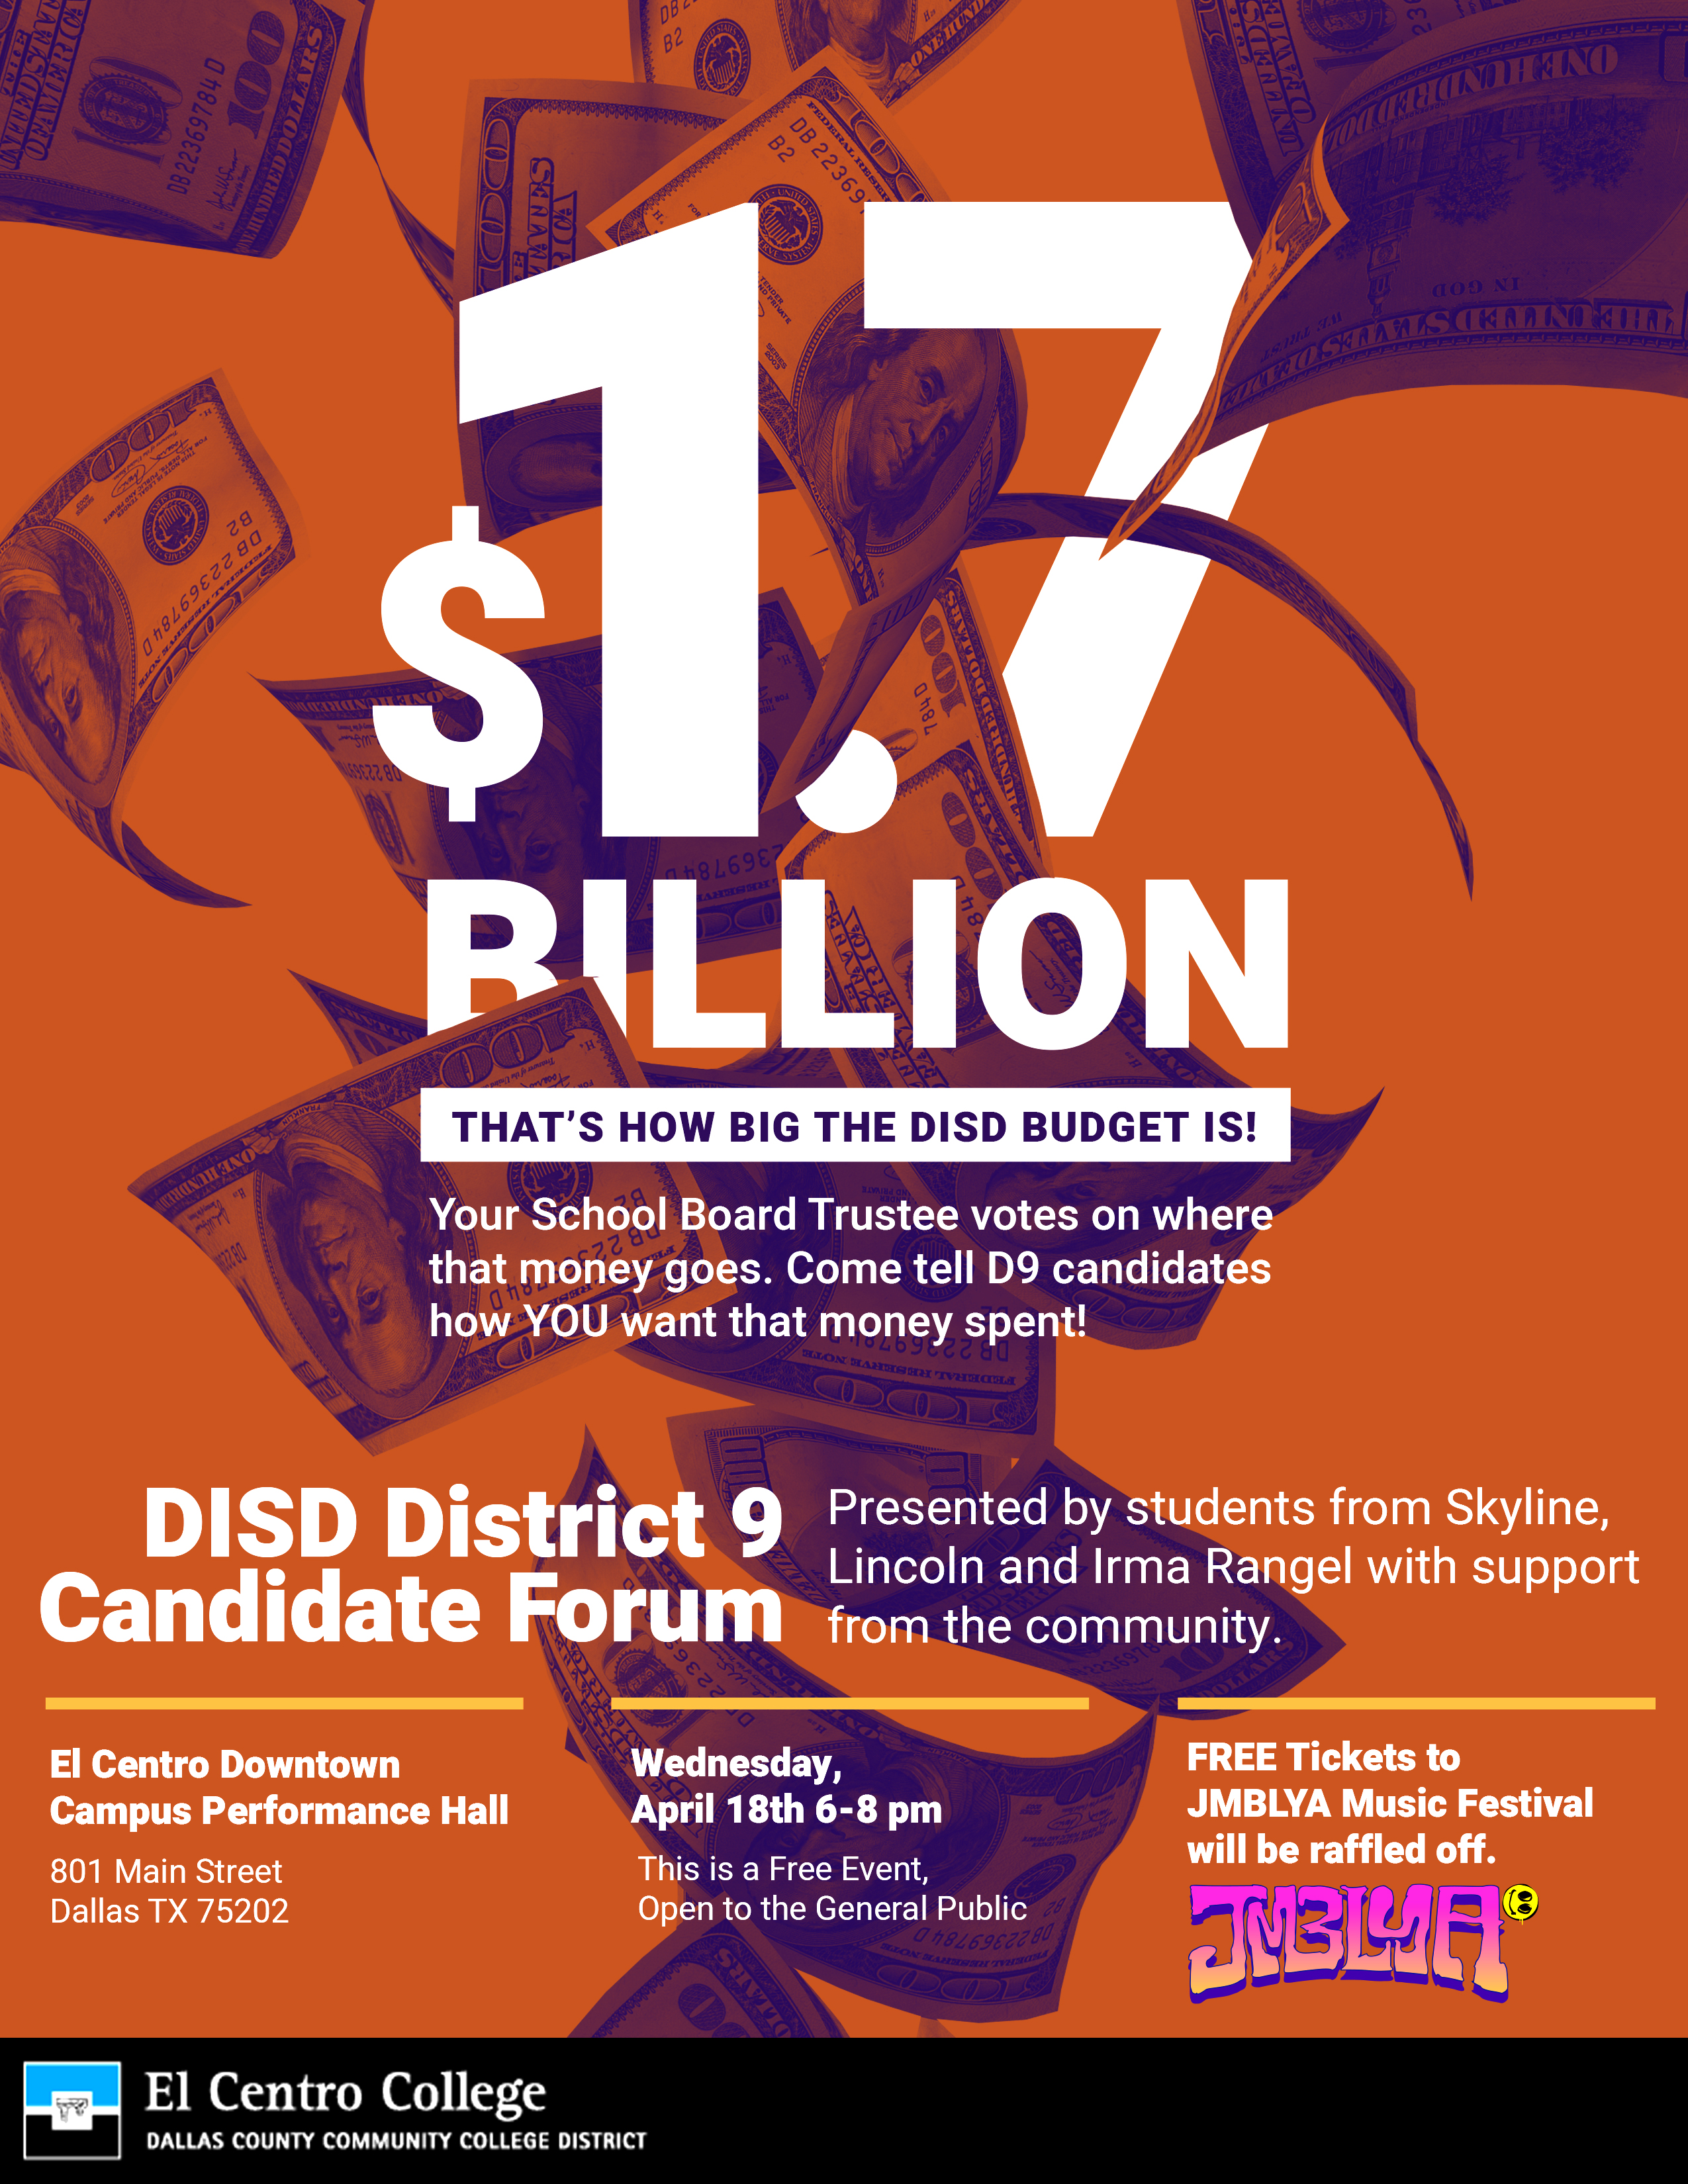 $17 Billion - that's how big the DISD budget is! Your School Board Trustee votes on where the money goes. Come tell D9 candidates how YOU want that money spent! Presented by students from Skyline, Lincoln and Irma Rangel with support from the community.